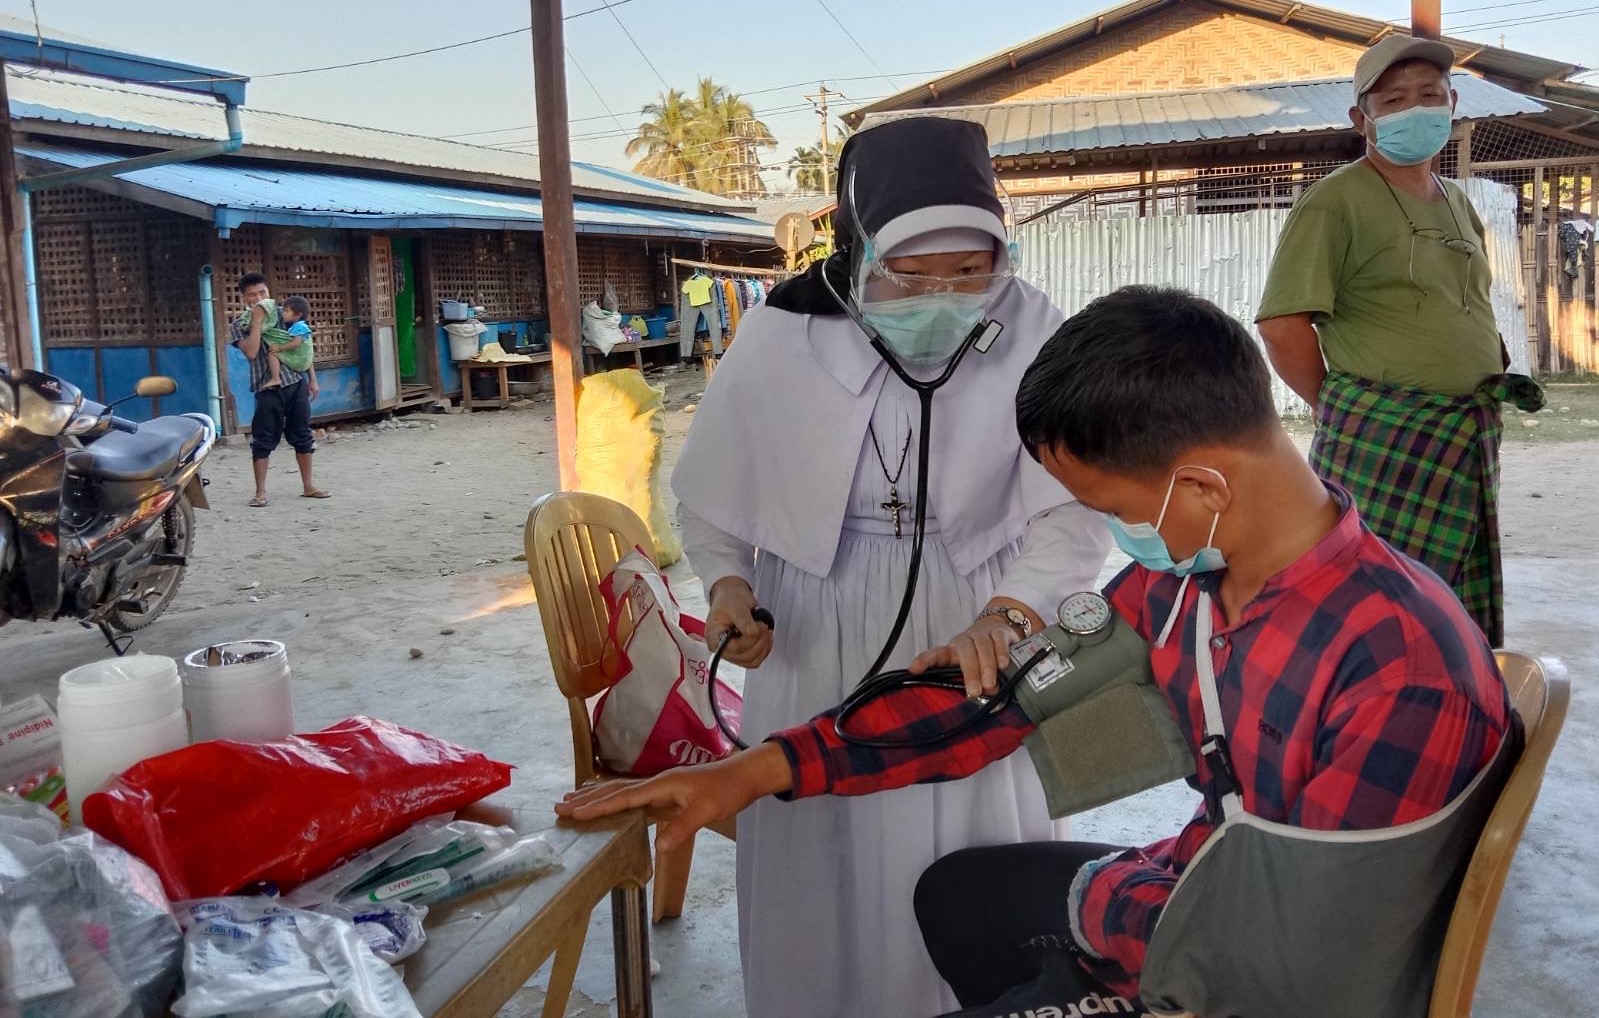 Sr. Ann Rose Nu Tawng checks the blood pressure of a man at a camp for internally displaced people near Myitkyina, the capital city of Kachin state, on Feb.19.